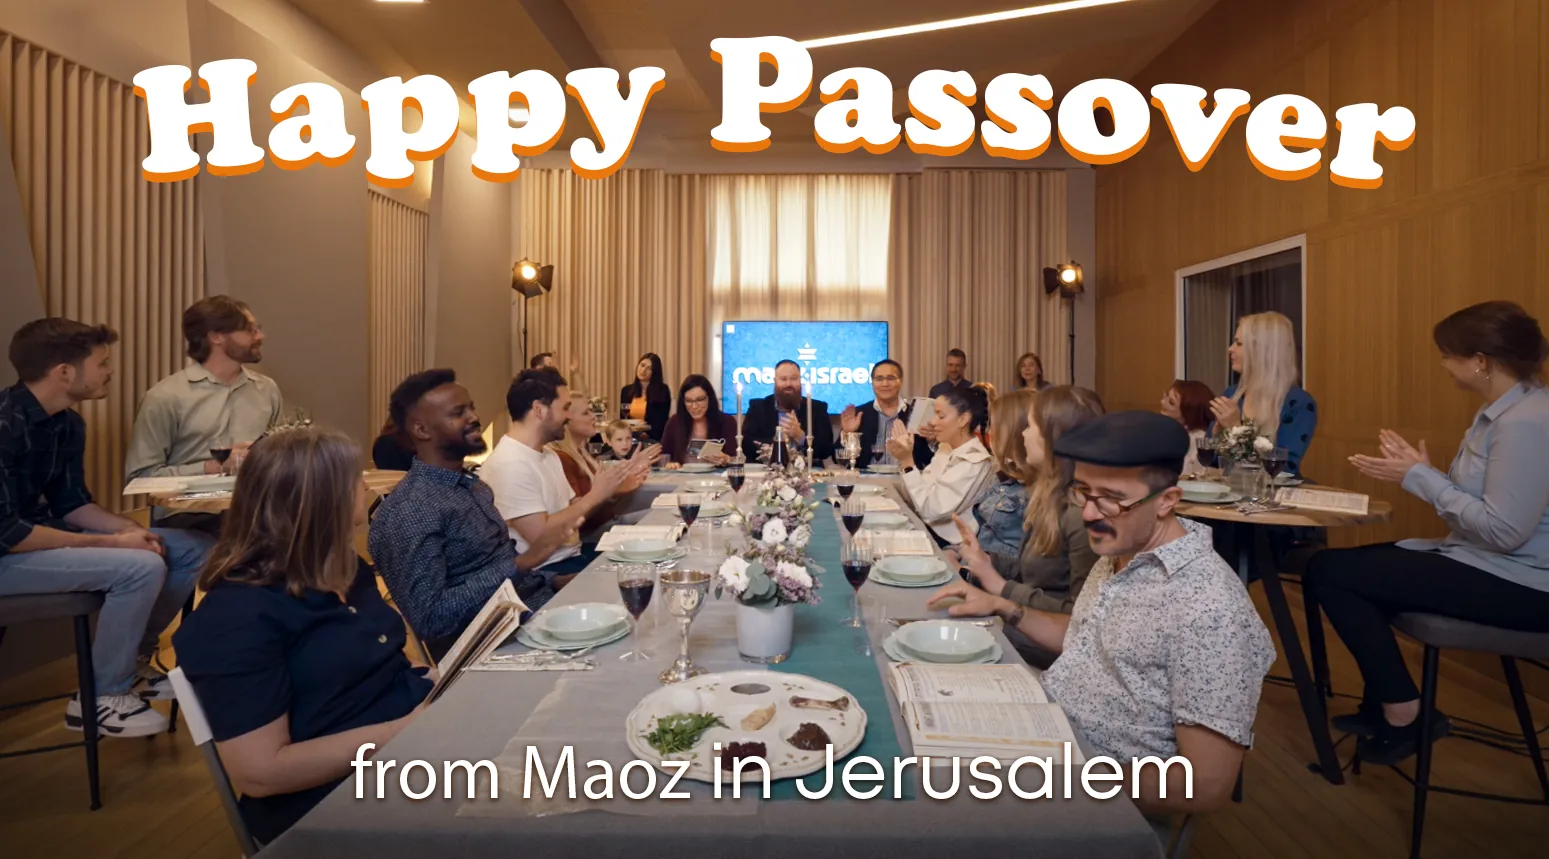 Featured image for “Happy Passover!”